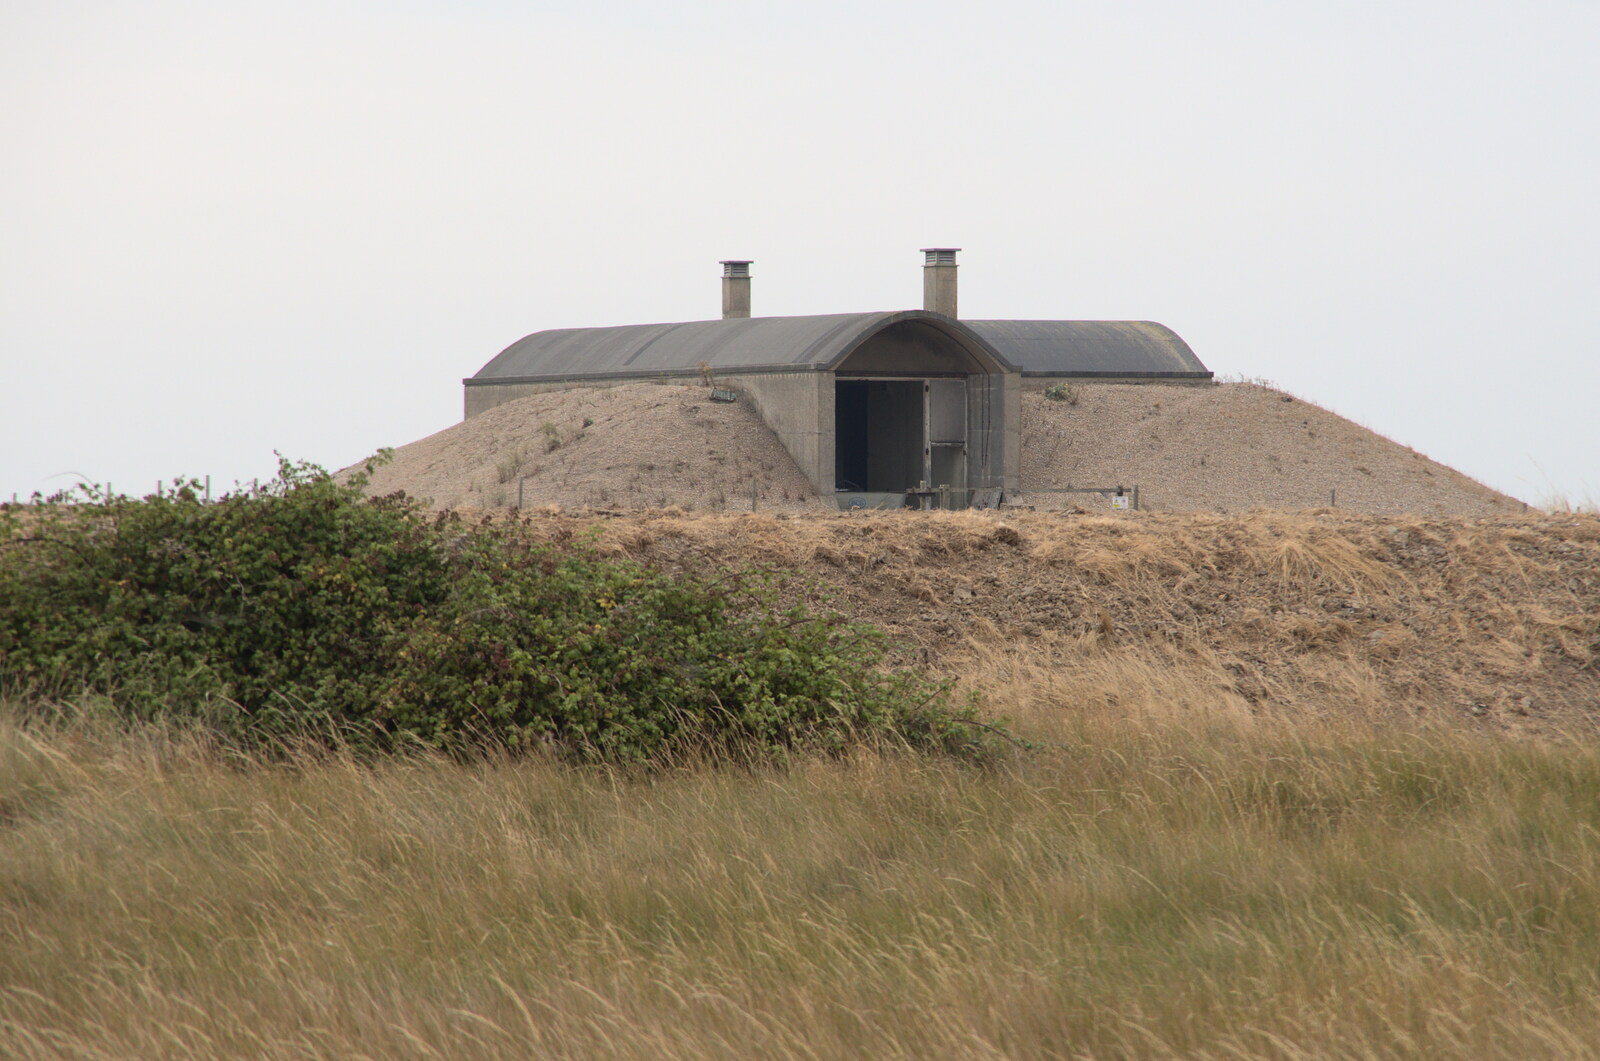 An experimental bunker from A Trip to Orford Ness, Orford, Suffolk - 16th August 2022